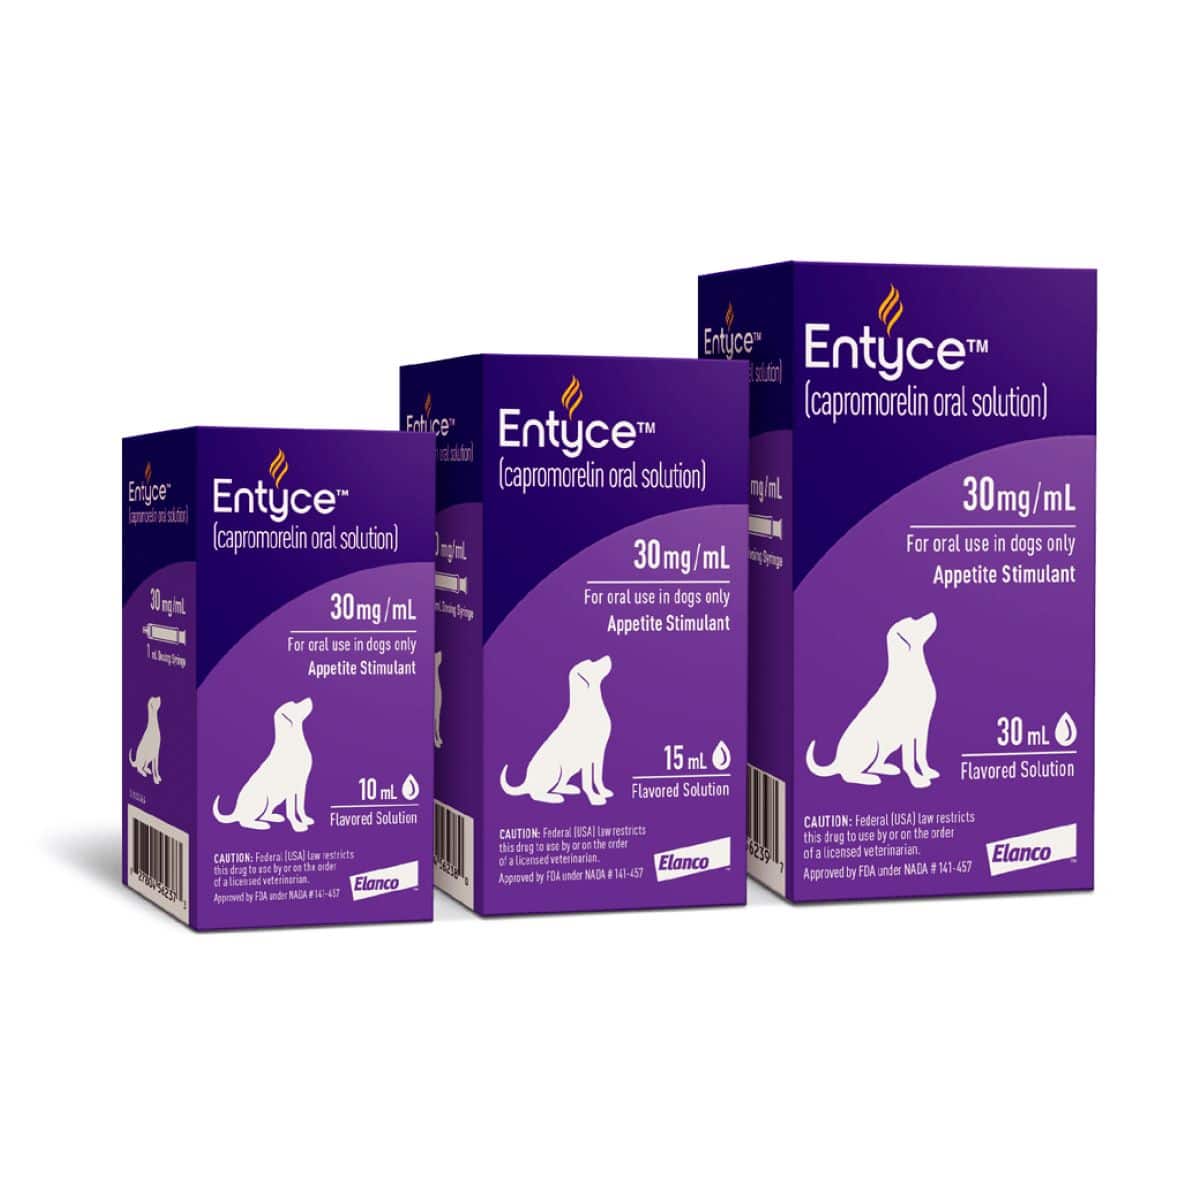 Entyce (capromorelin) Oral Solution for Dogs